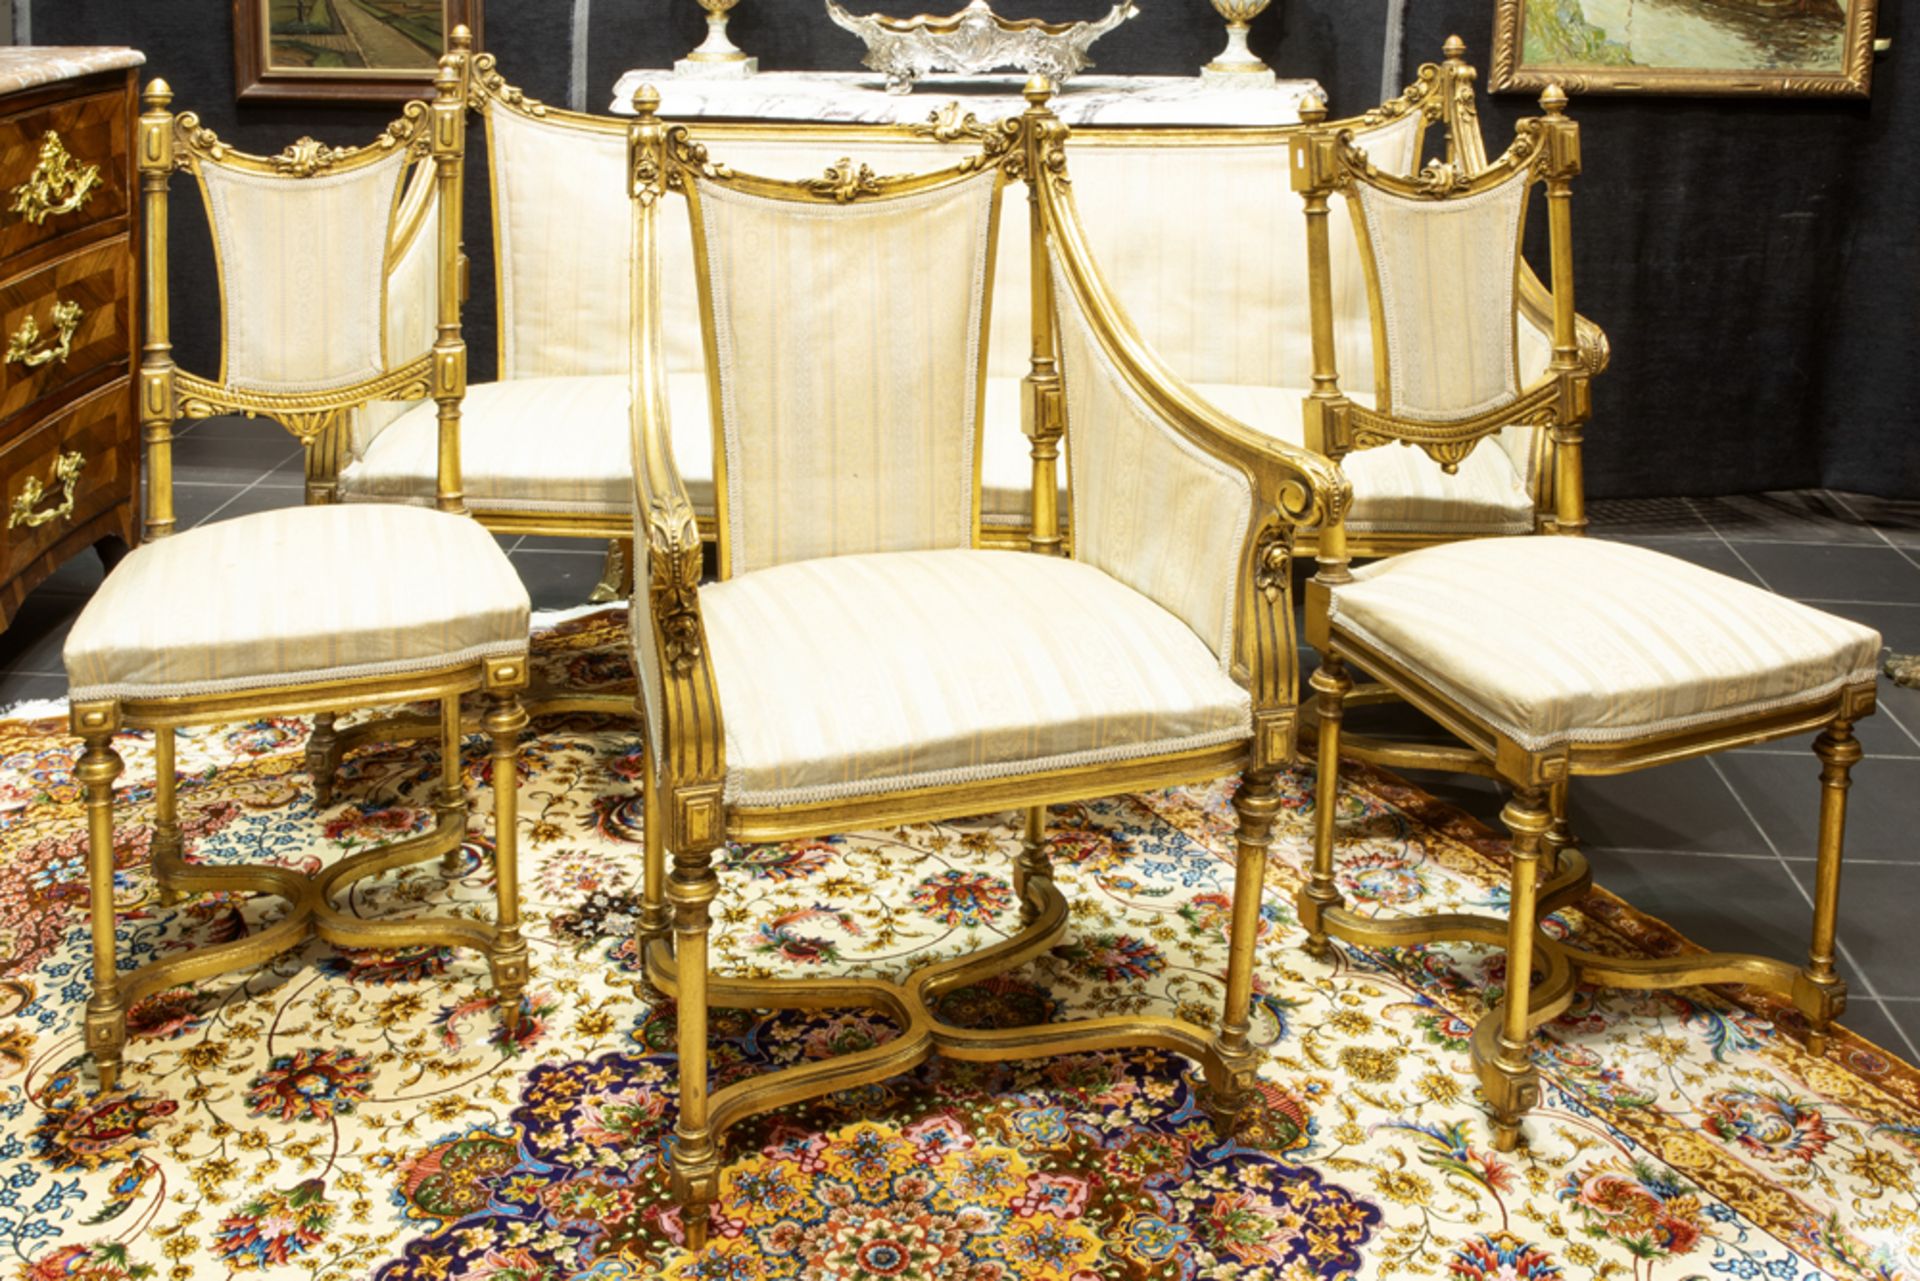 6pc neoclassical salon suite in sculpted and gilded wood with a Louis XVI design and ornamentation : - Image 3 of 4